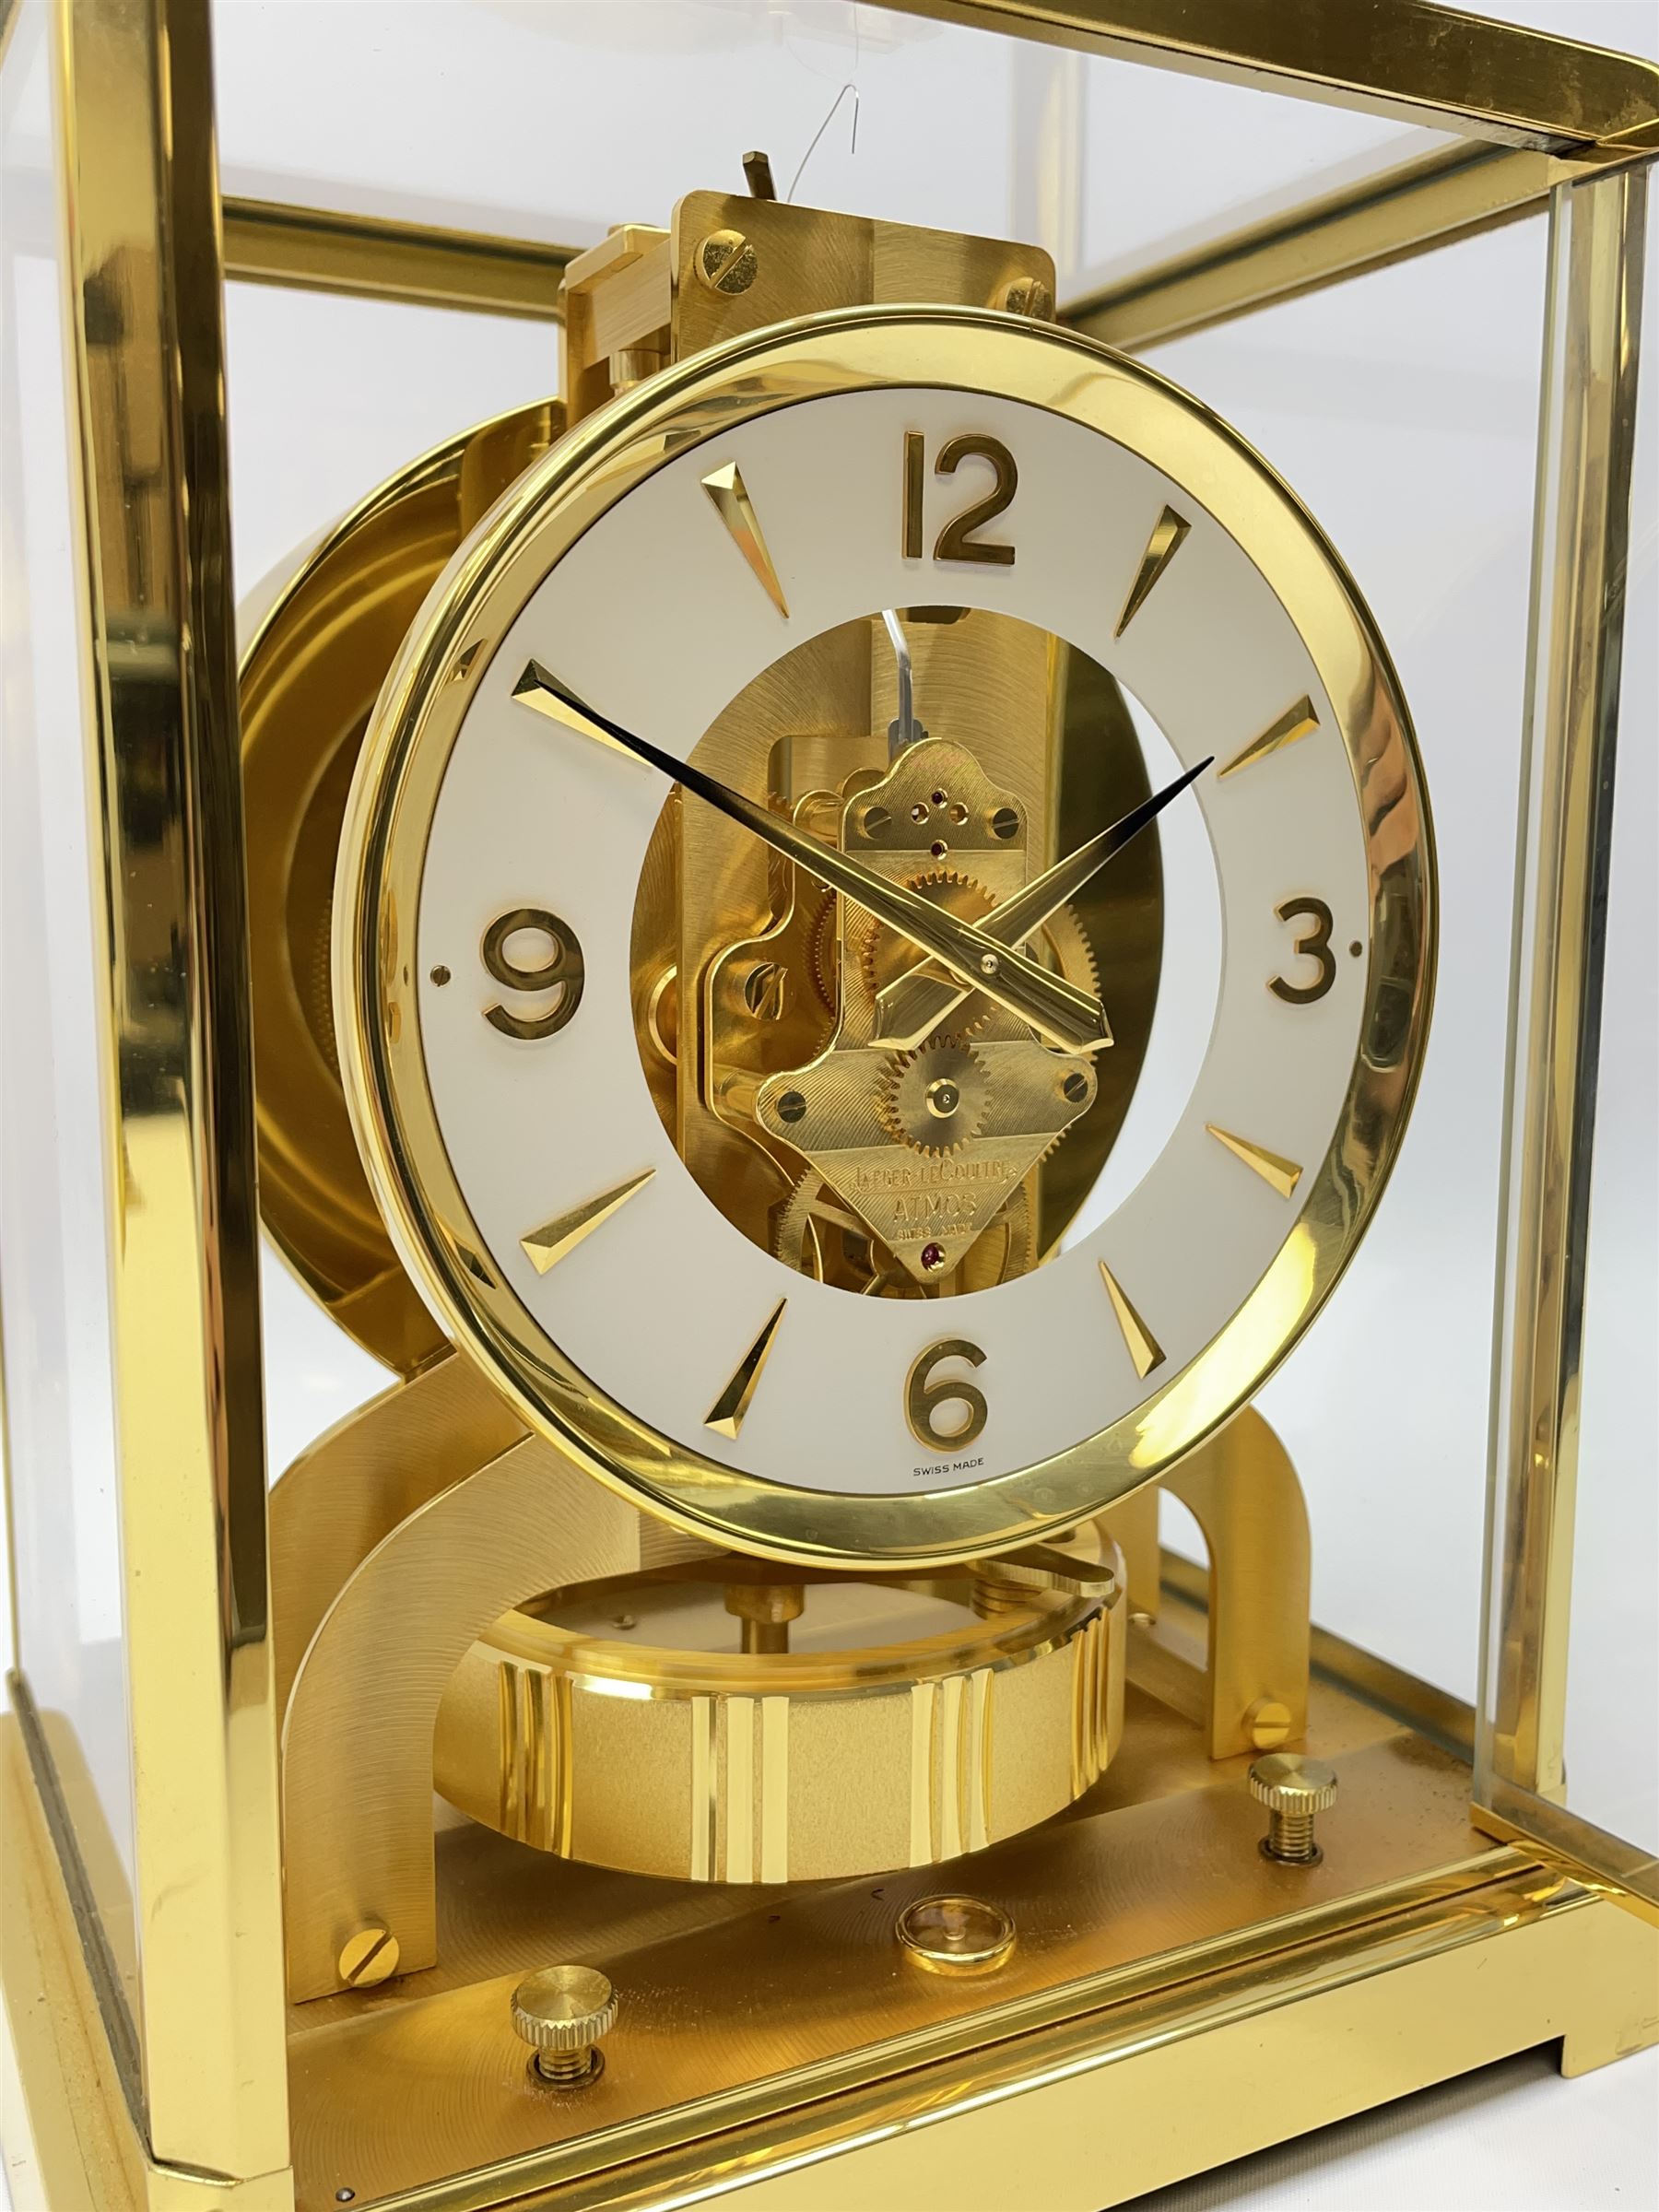 Jaeger-LeCoultre Atmos timepiece clock - Image 2 of 8